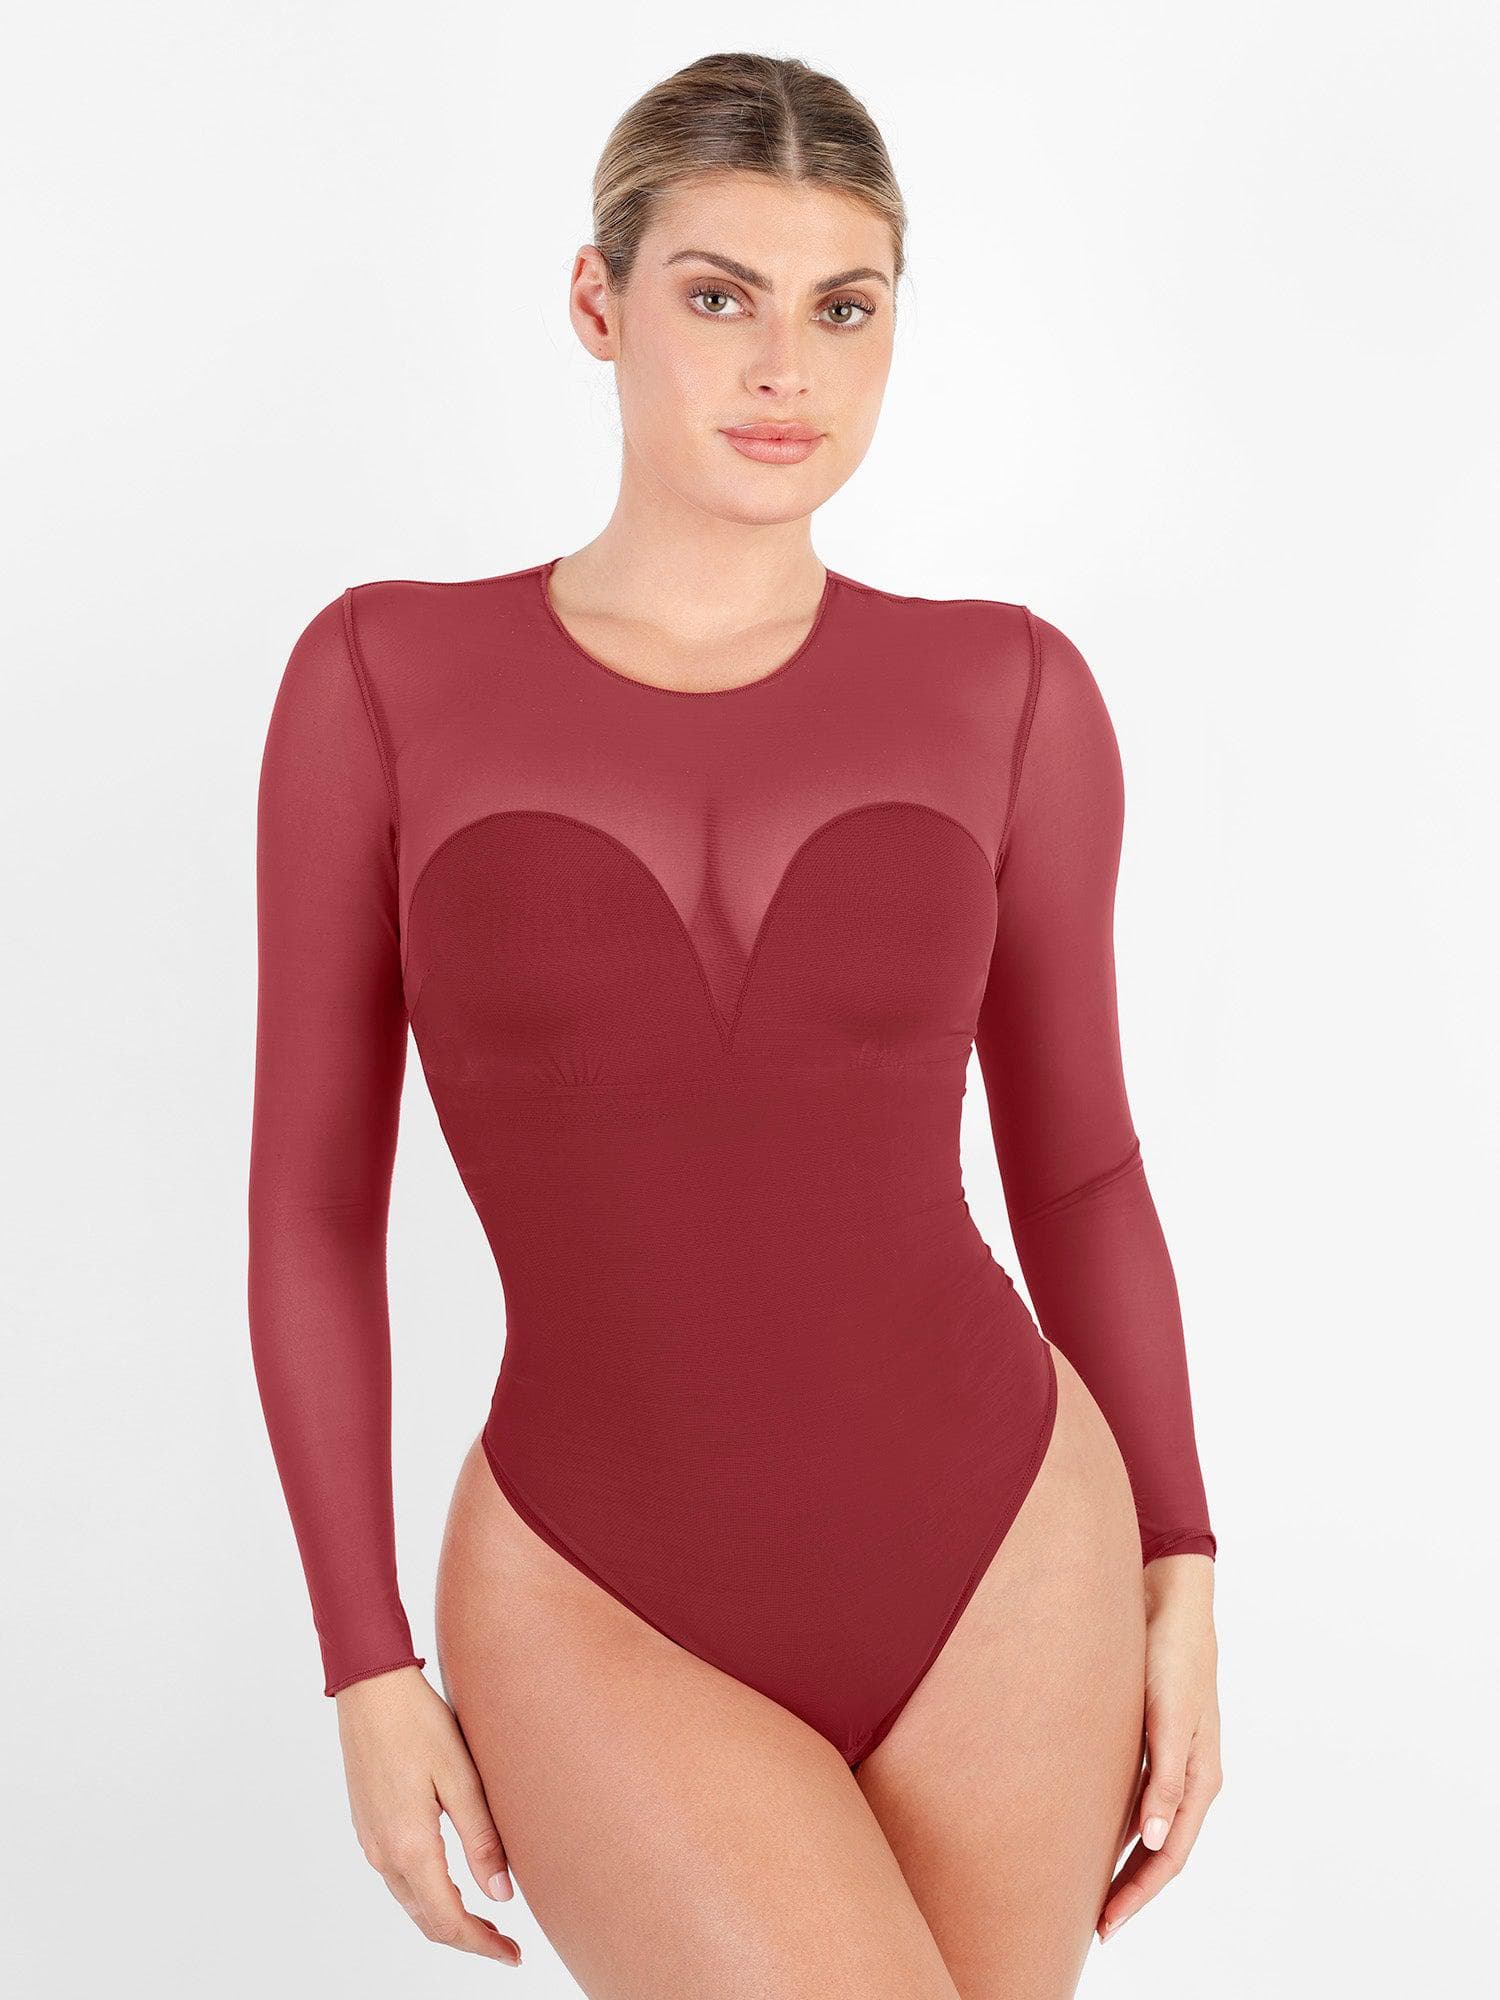 Red Slinky Bodysuit With Poppers - Size 8